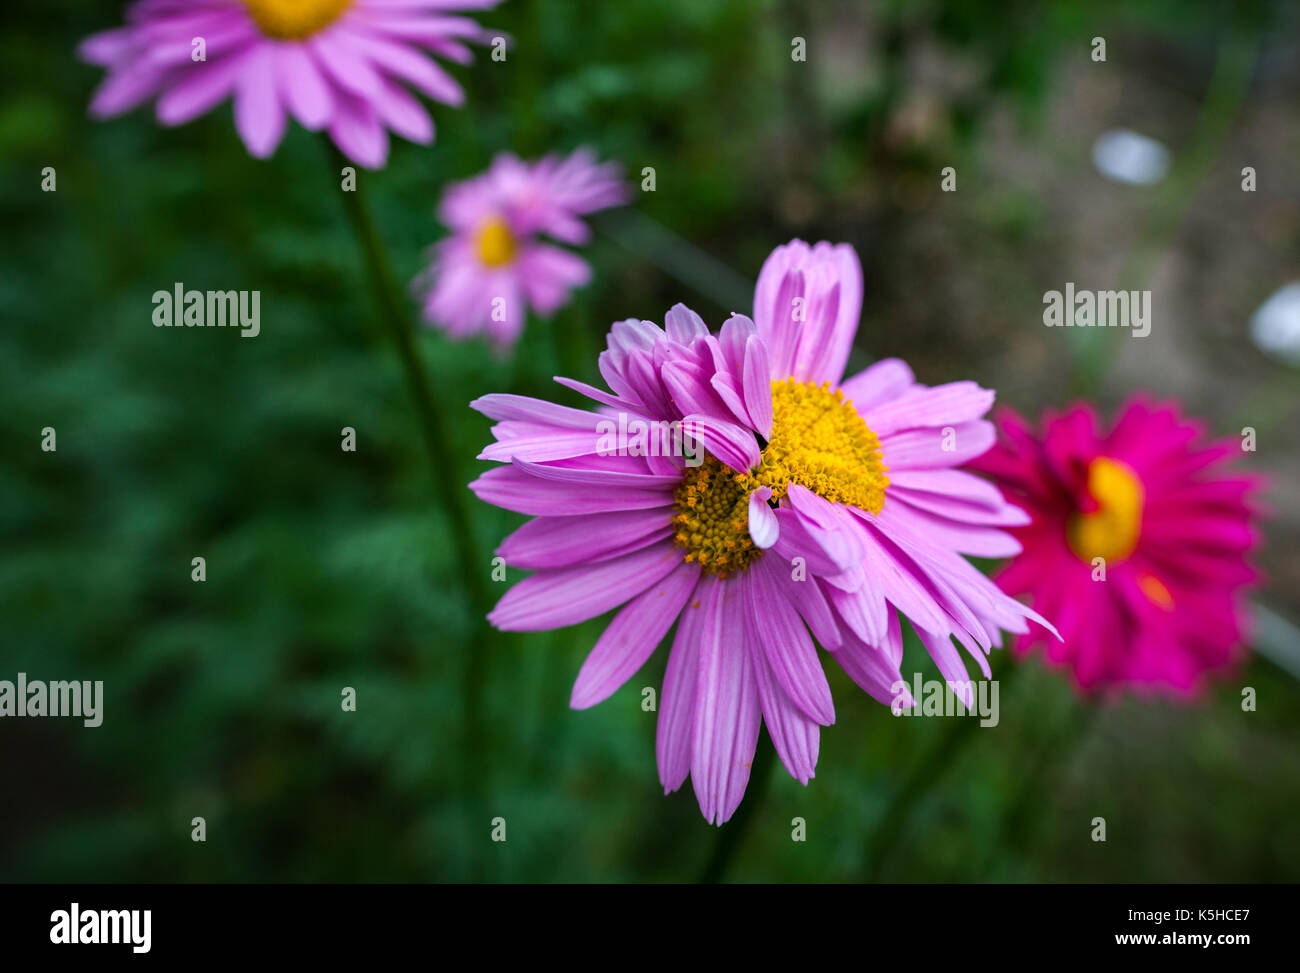 Abnormal flowers. Double headed pink daisies. Natural blurred background. Stock Photo